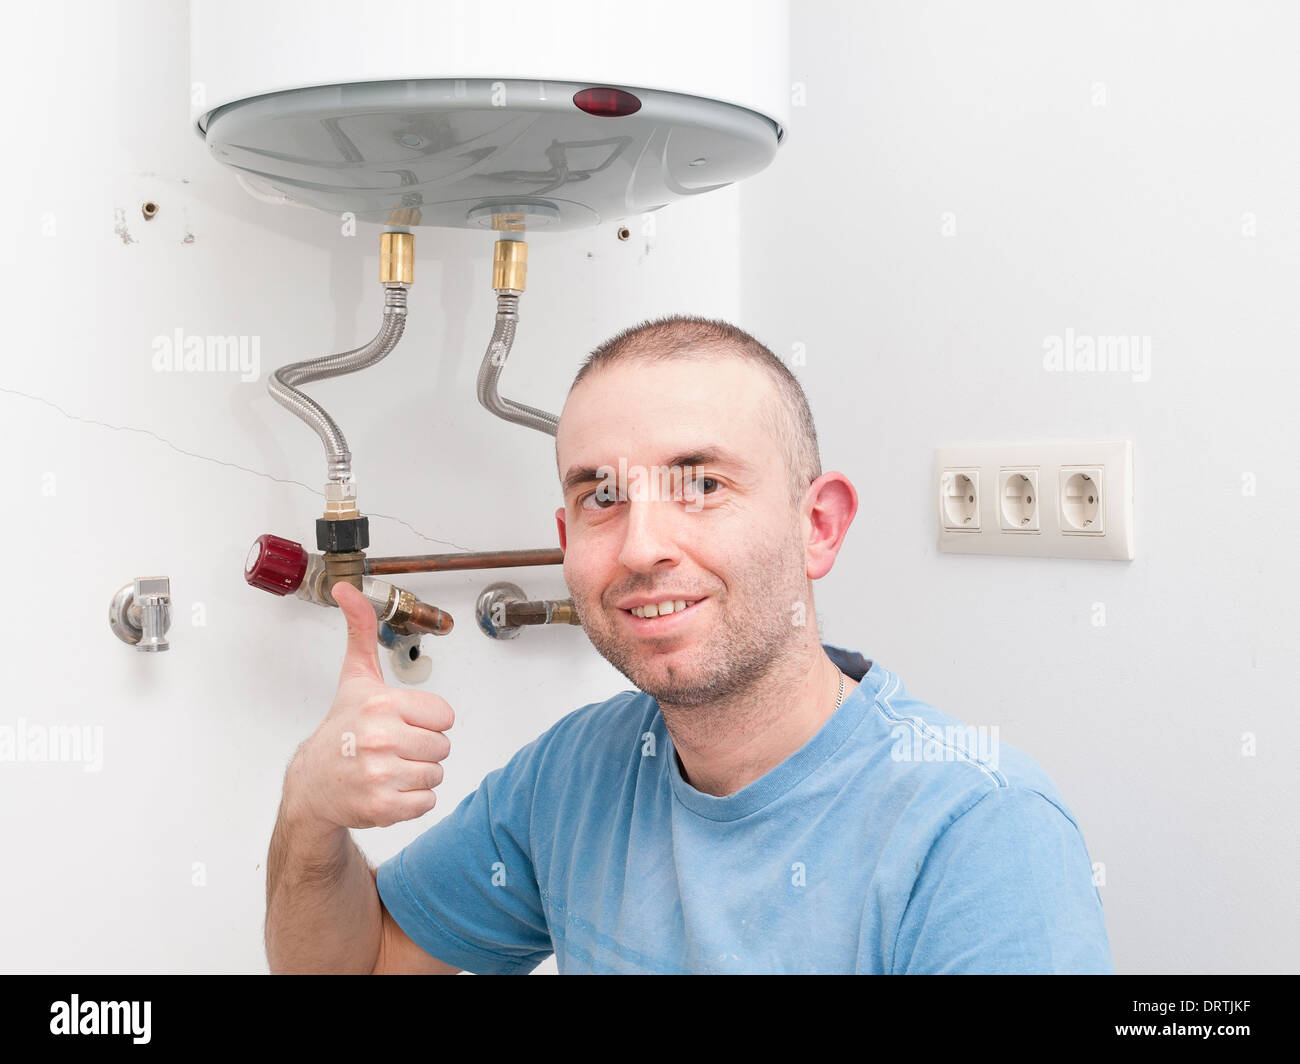 Plumber Man expressing positivity with ok symbol with hand. Man has repaired an electric boiler. Stock Photo